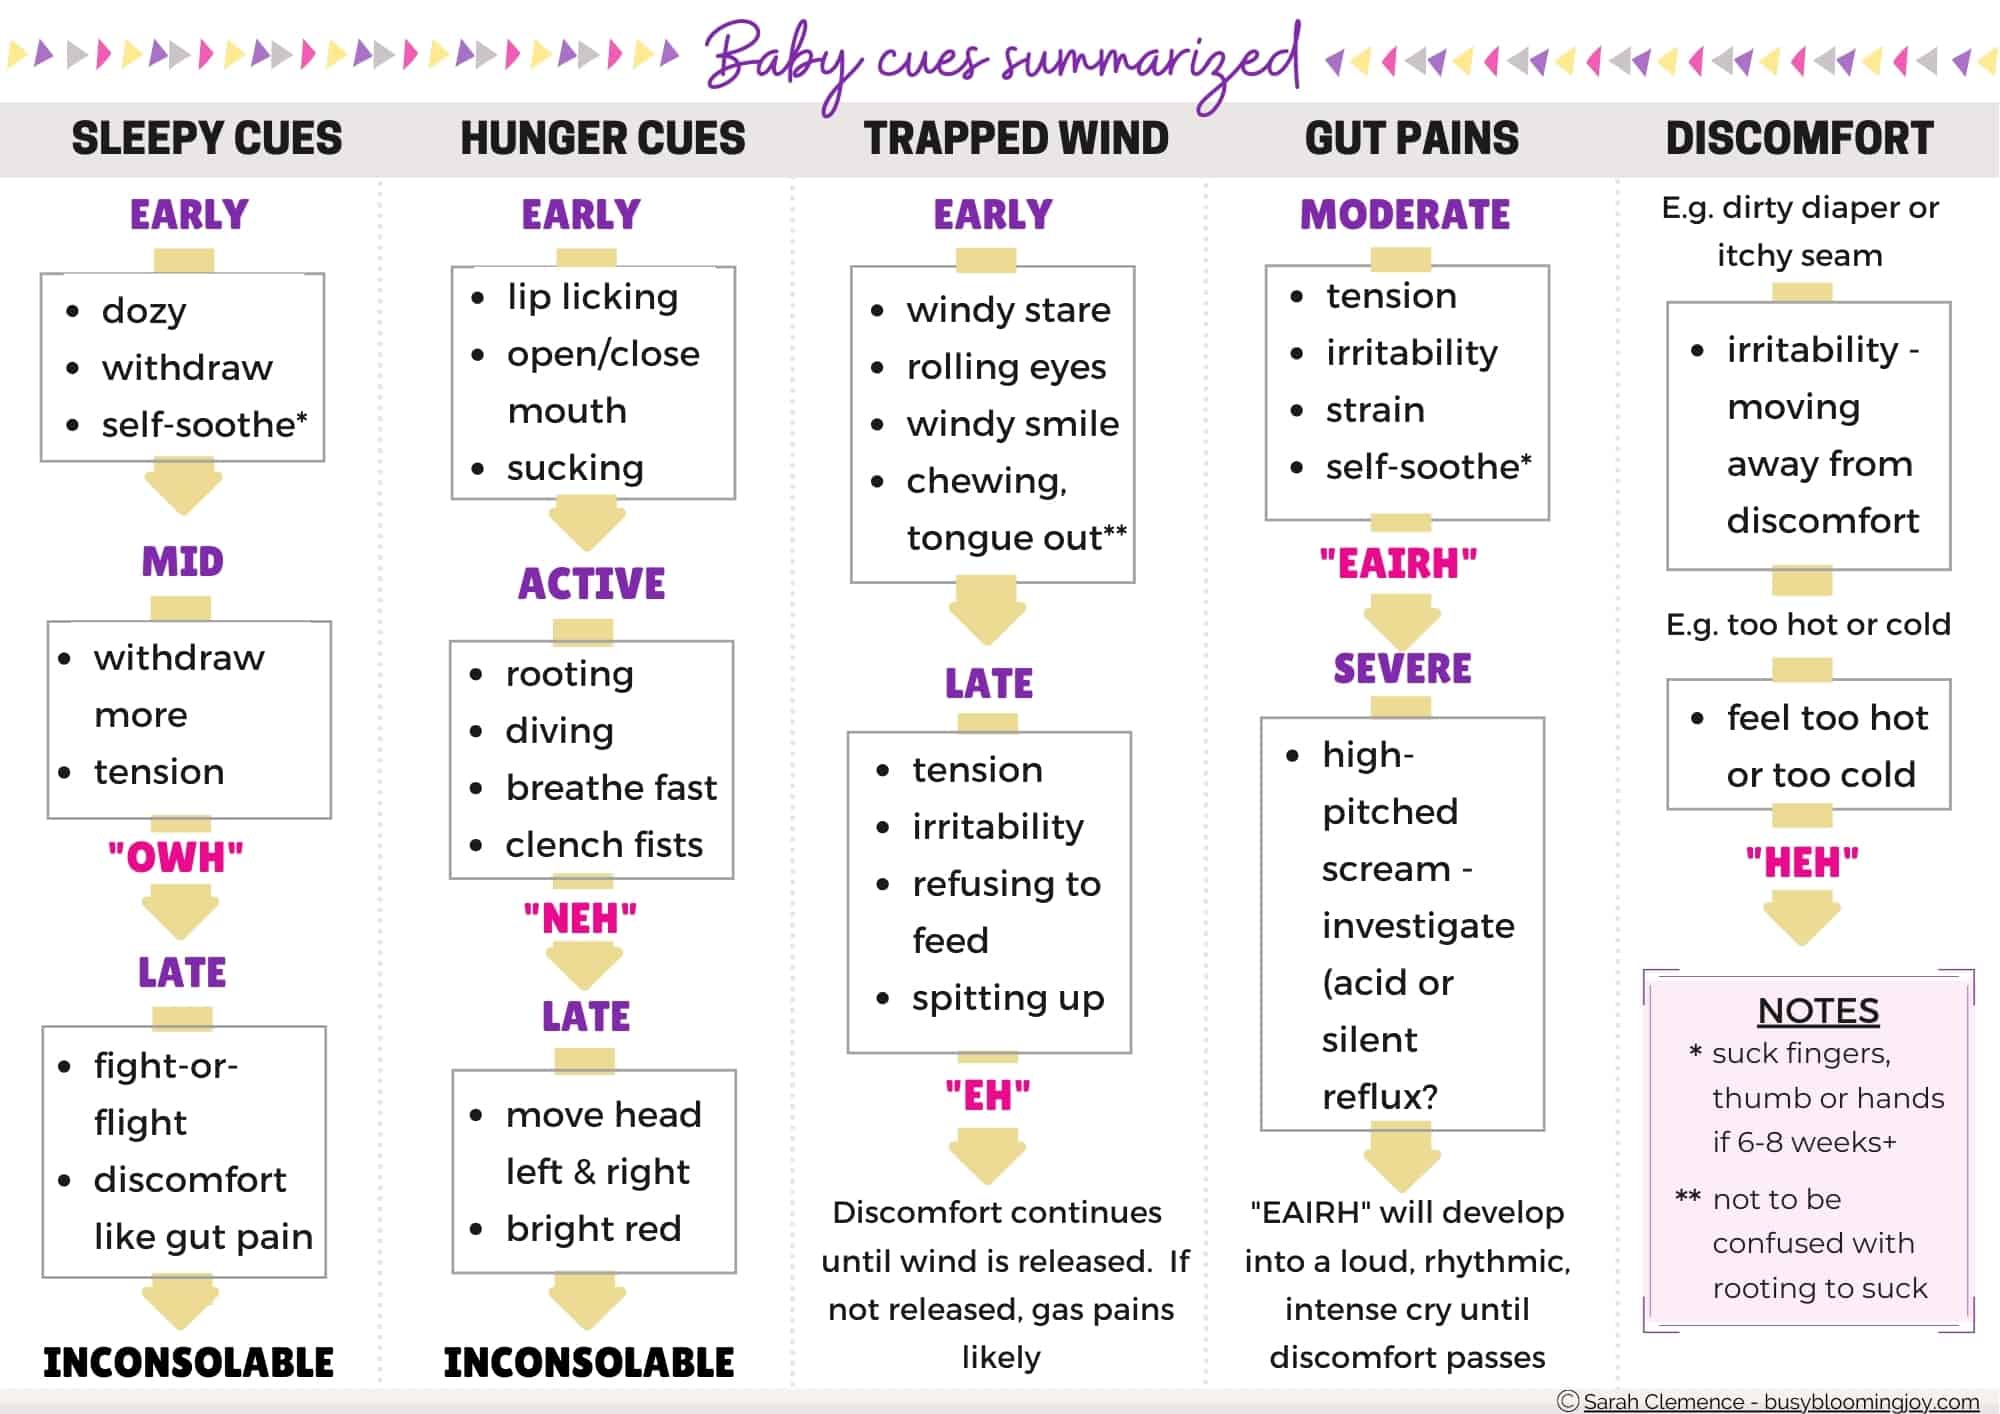 Baby cues summary chart - all cues